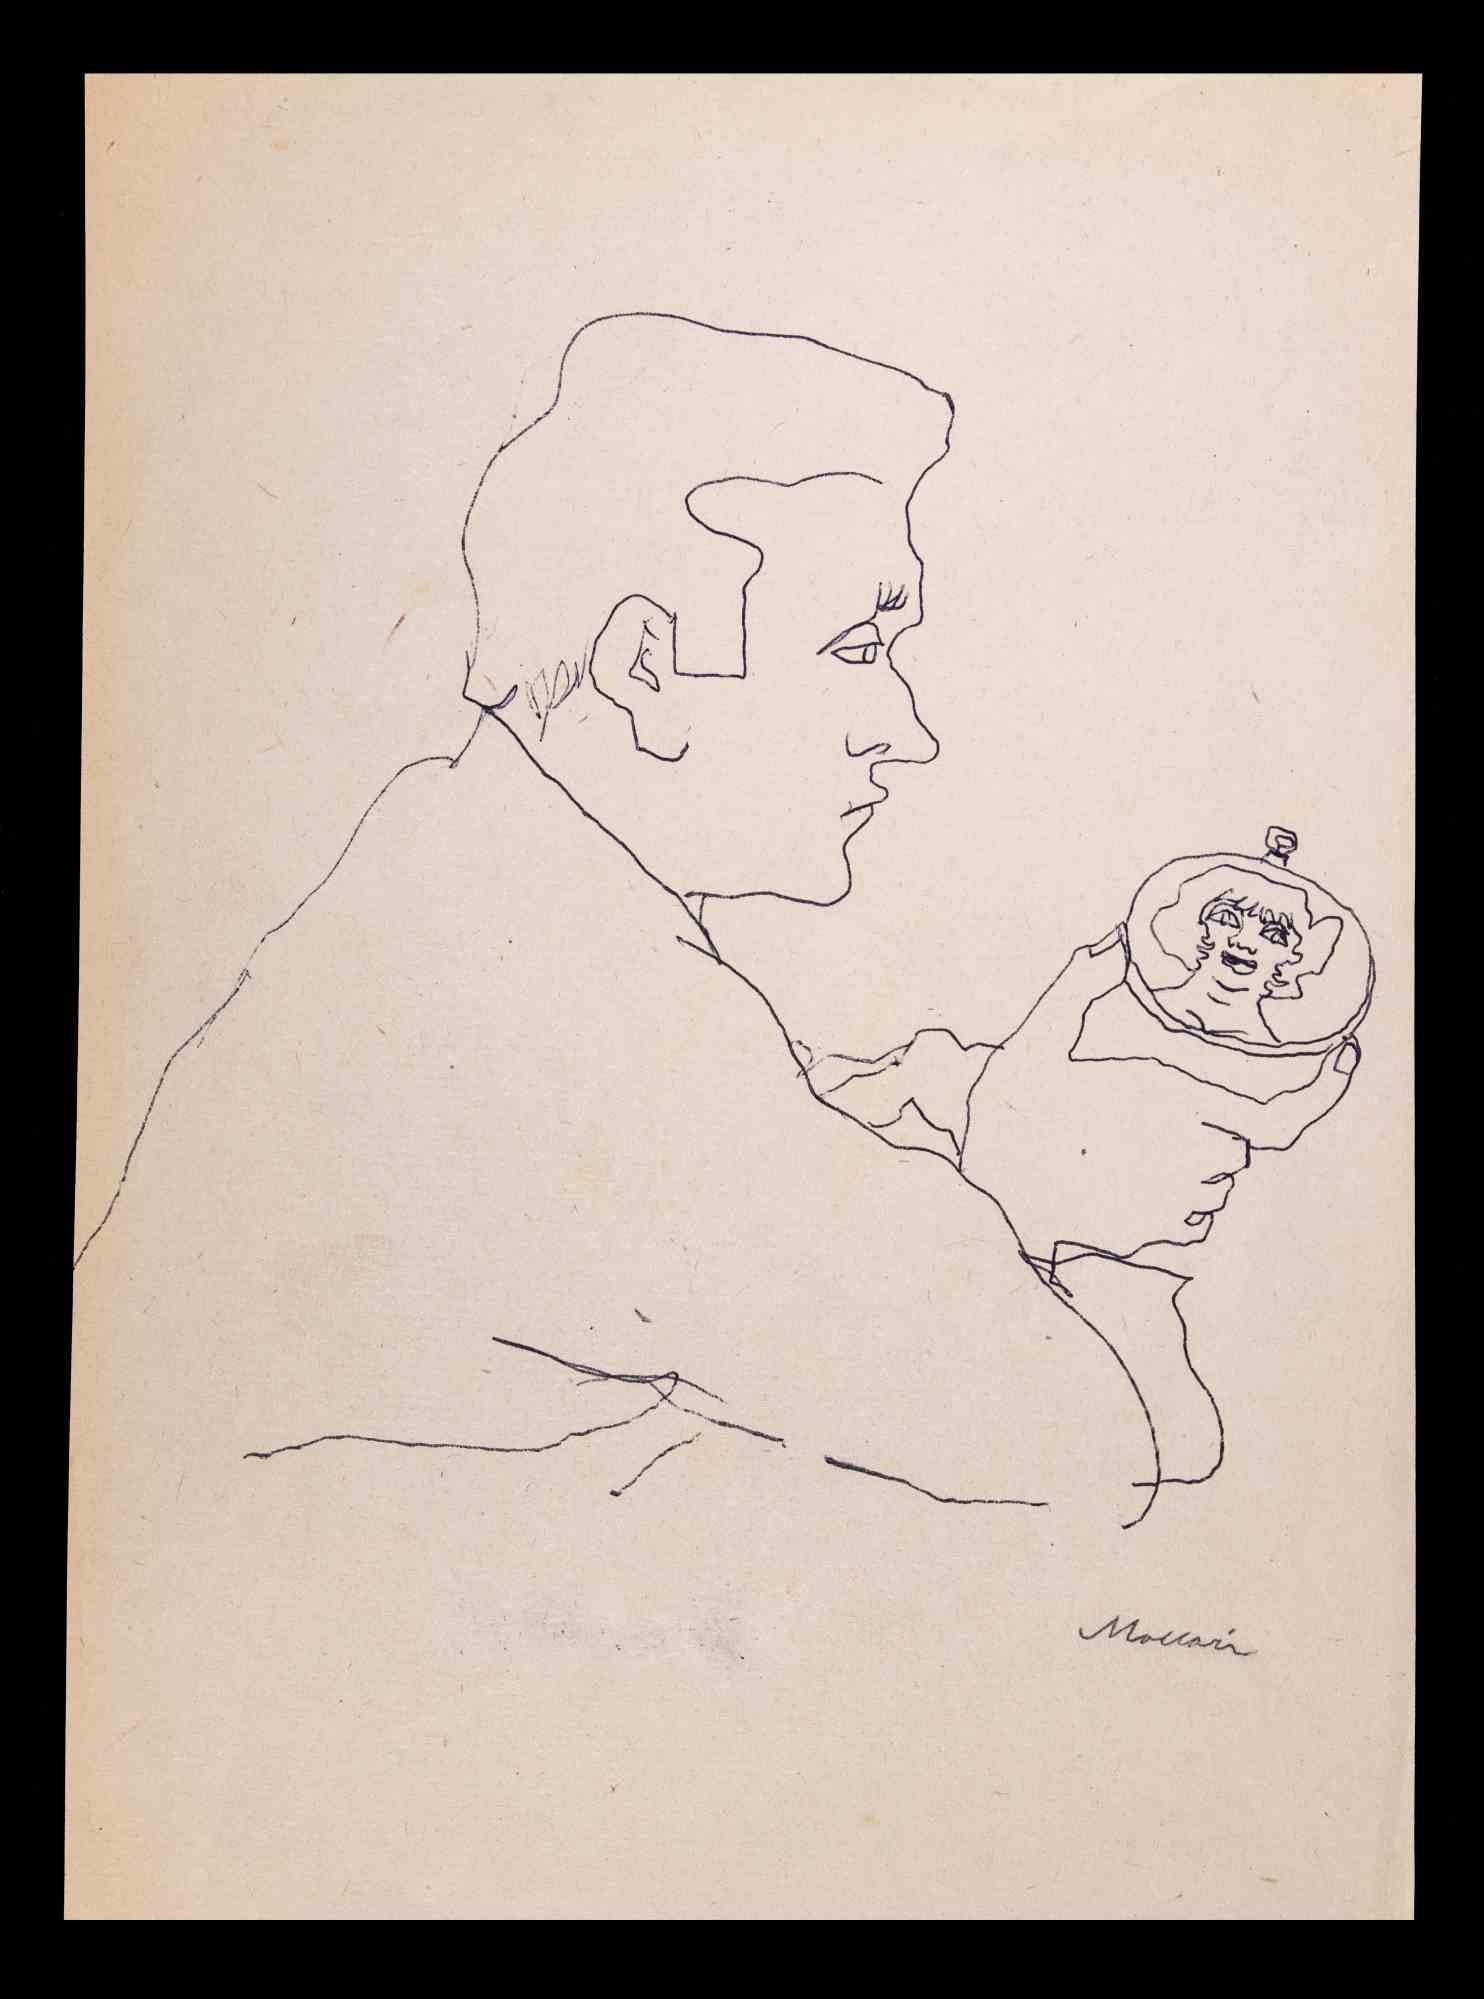 I Can't Wait is a Pen Drawing realized by Mino Maccari (1924-1989) in 1965s.

Hand signed on the lower margin.

Good condition on a yellowed paper.

Mino Maccari (Siena, 1924-Rome, June 16, 1989) was an Italian writer, painter, engraver and